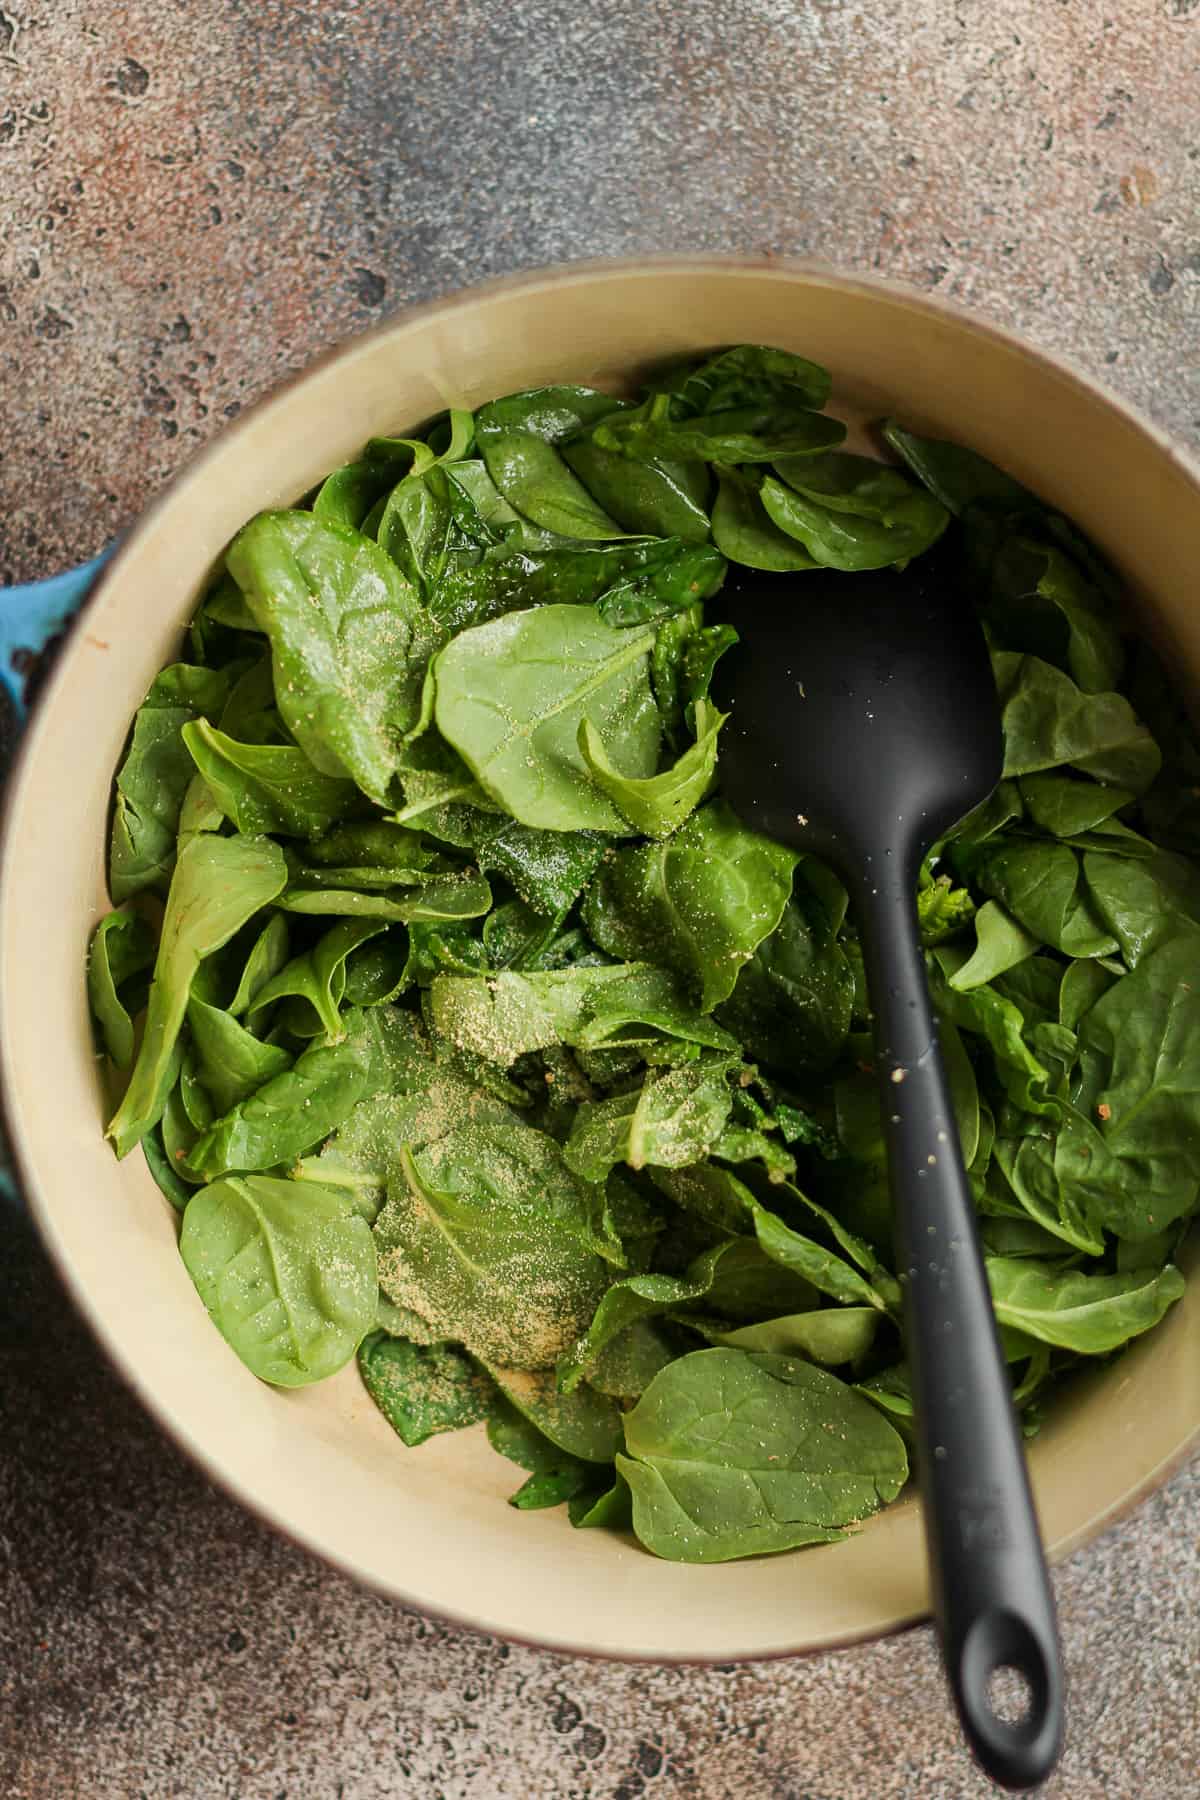 A pot of the spinach cooking.